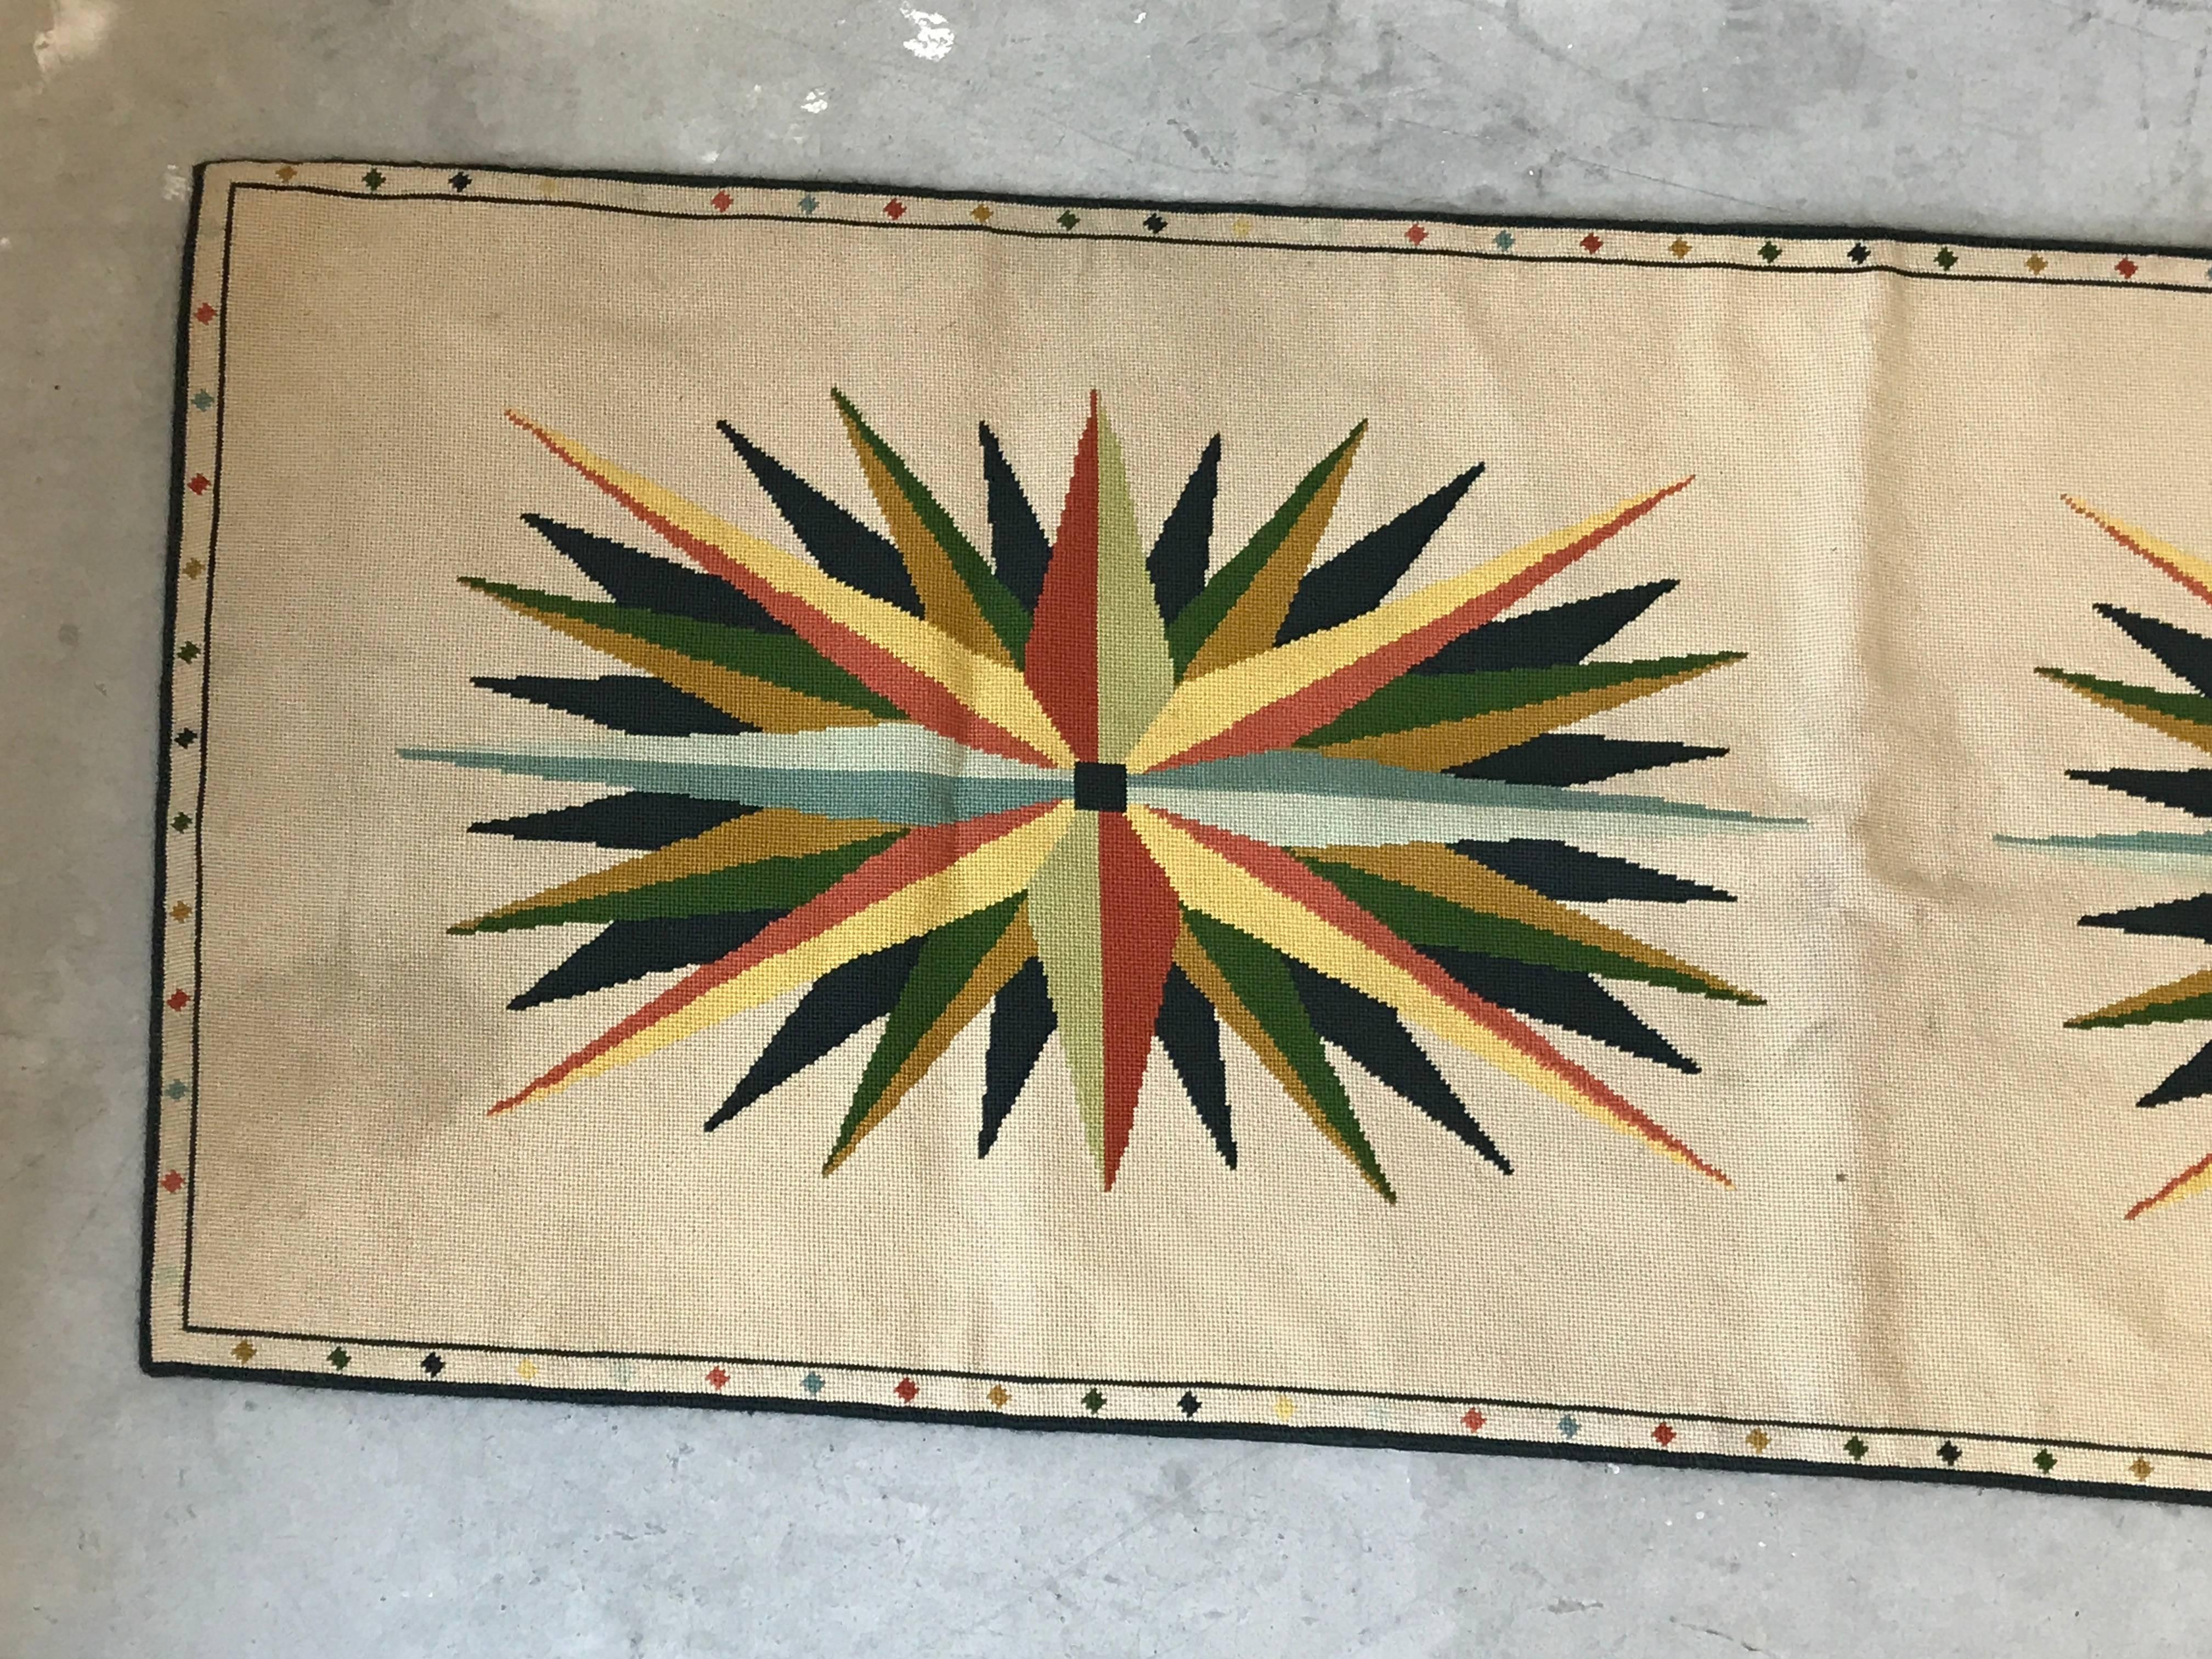 Offered is a fabulous, 1960s needlepoint polychrome compass motif on a runner rug. Soft cotton-canvas blend. We suggest a thin rug pad to prevent slipping. Wrinkles will flatten after arrival and laid flat, or it can be steamed out for immediate